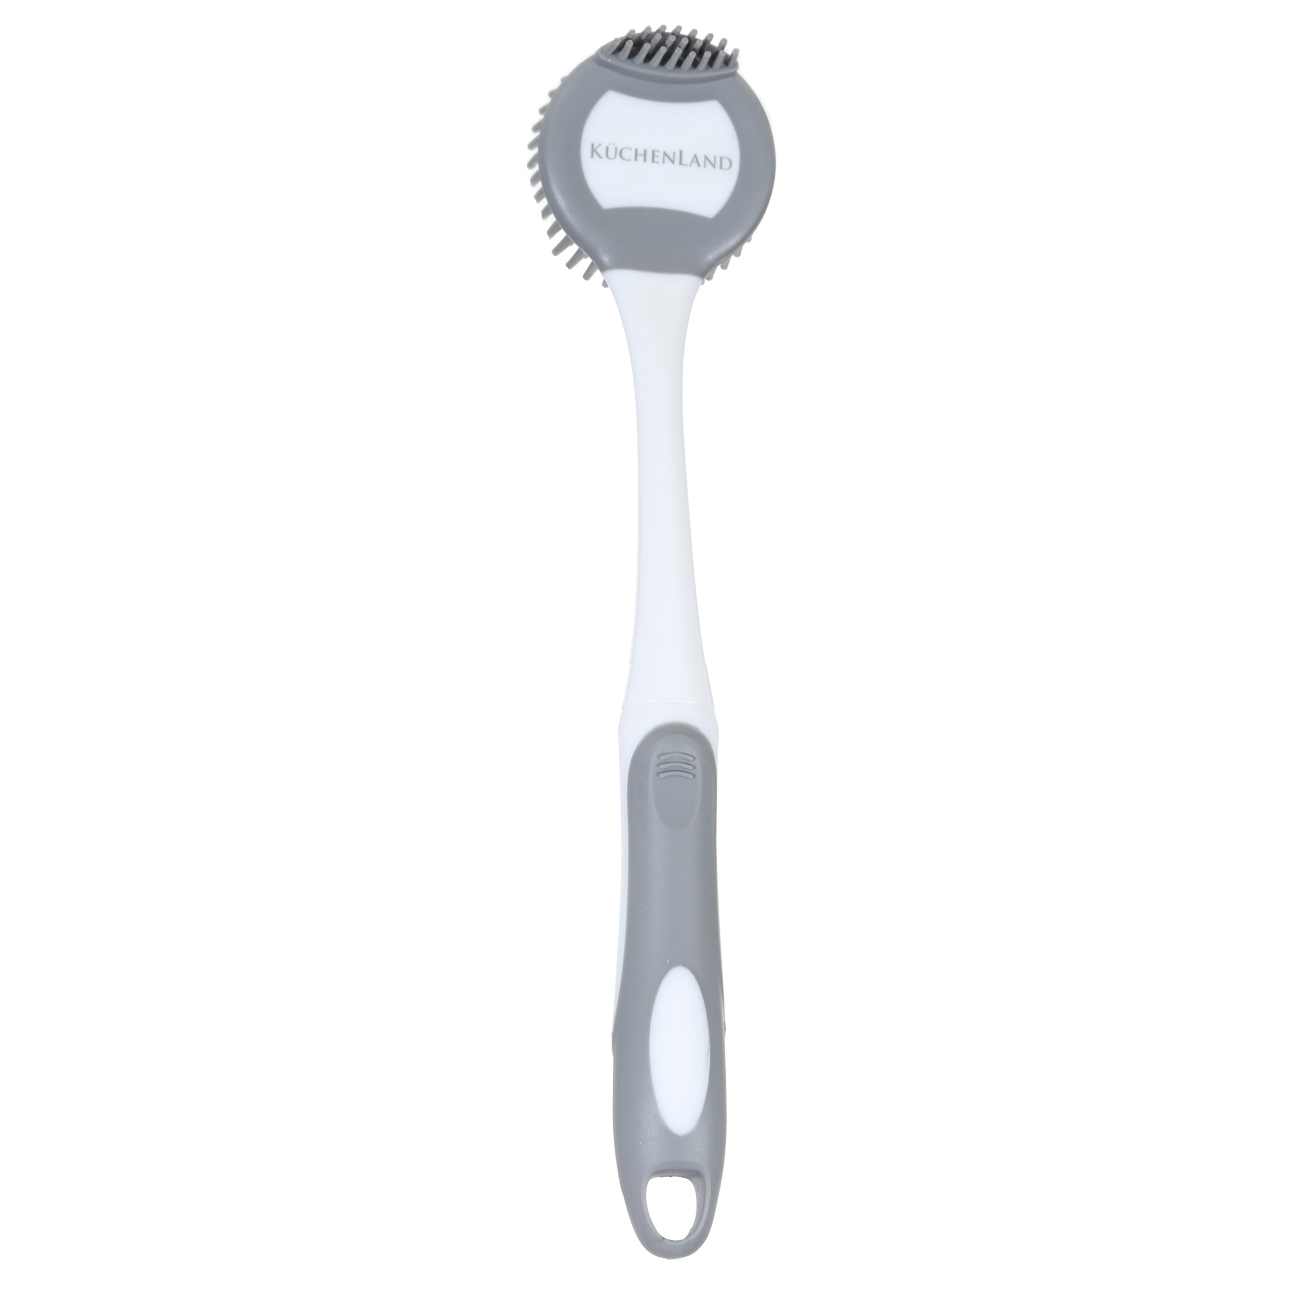 Cleaning brush, 30 cm, double-sided, rubber / plastic, gray-white, Clean изображение № 2